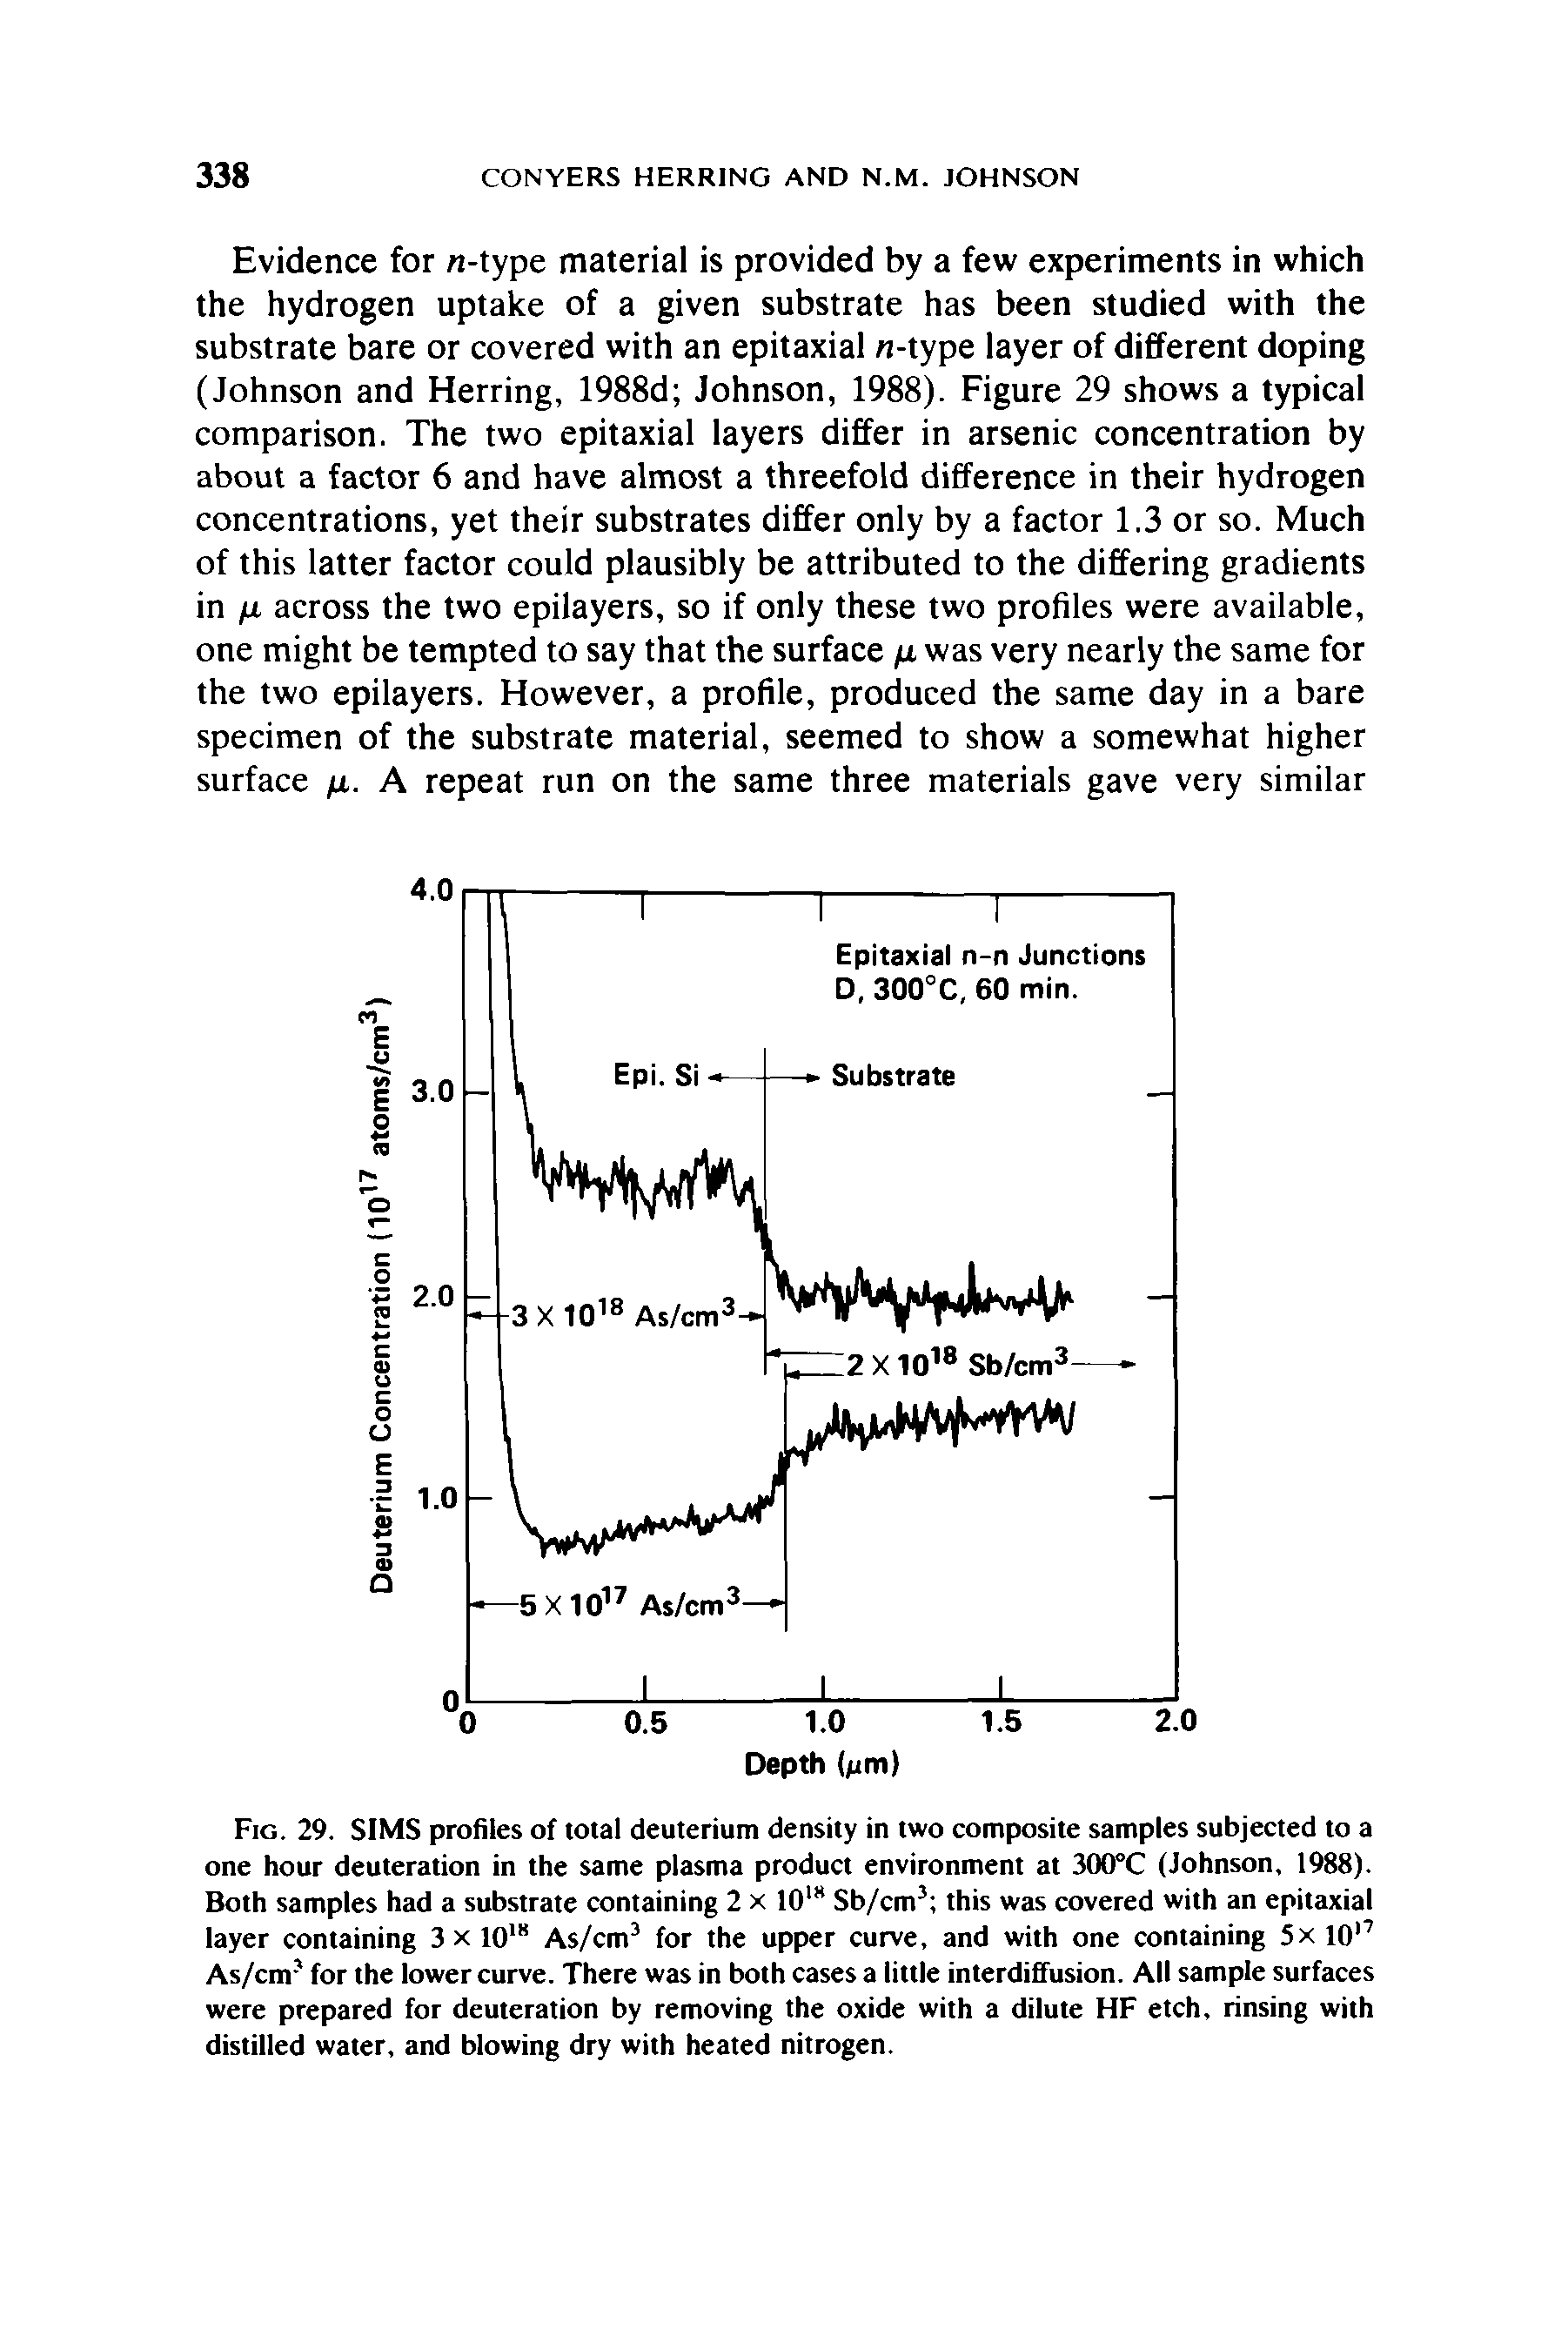 Fig. 29. SIMS profiles of total deuterium density in two composite samples subjected to a one hour deuteration in the same plasma product environment at 300°C (Johnson, 1988). Both samples had a substrate containing 2 x 10IH Sb/cm3 this was covered with an epitaxial layer containing 3 x 1018 As/cm3 for the upper curve, and with one containing 5x 10 7 As/cm3 for the lower curve. There was in both cases a little interdiffusion. All sample surfaces were prepared for deuteration by removing the oxide with a dilute HF etch, rinsing with distilled water, and blowing dry with heated nitrogen.